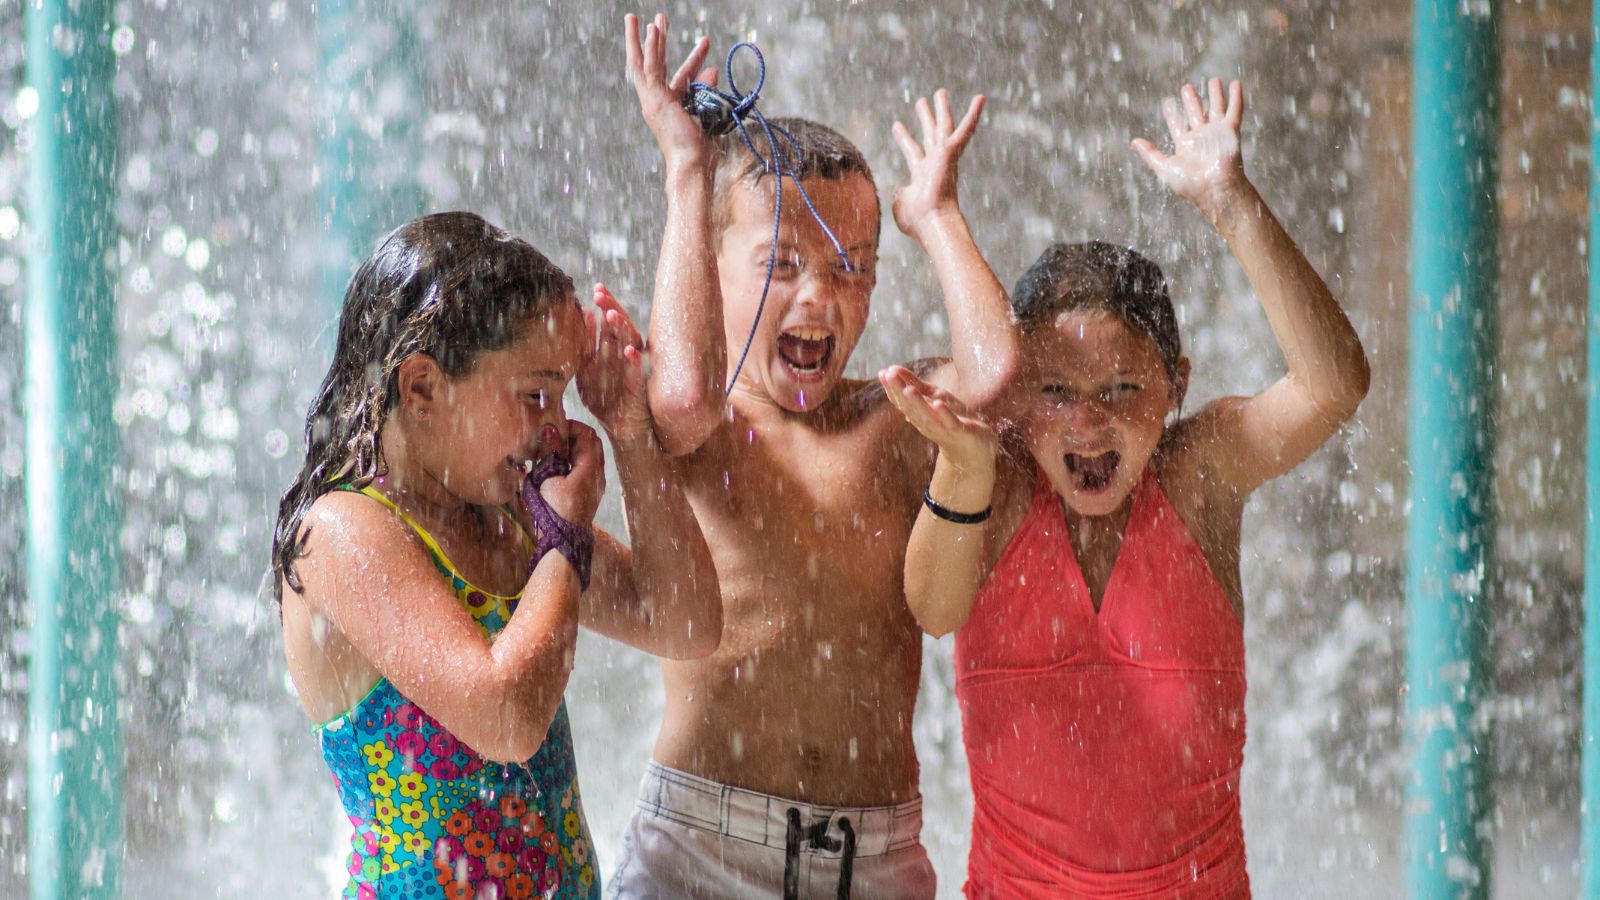 Kids stay free at the all-inclusive Woodloch Resort (Photo: Woodloch)